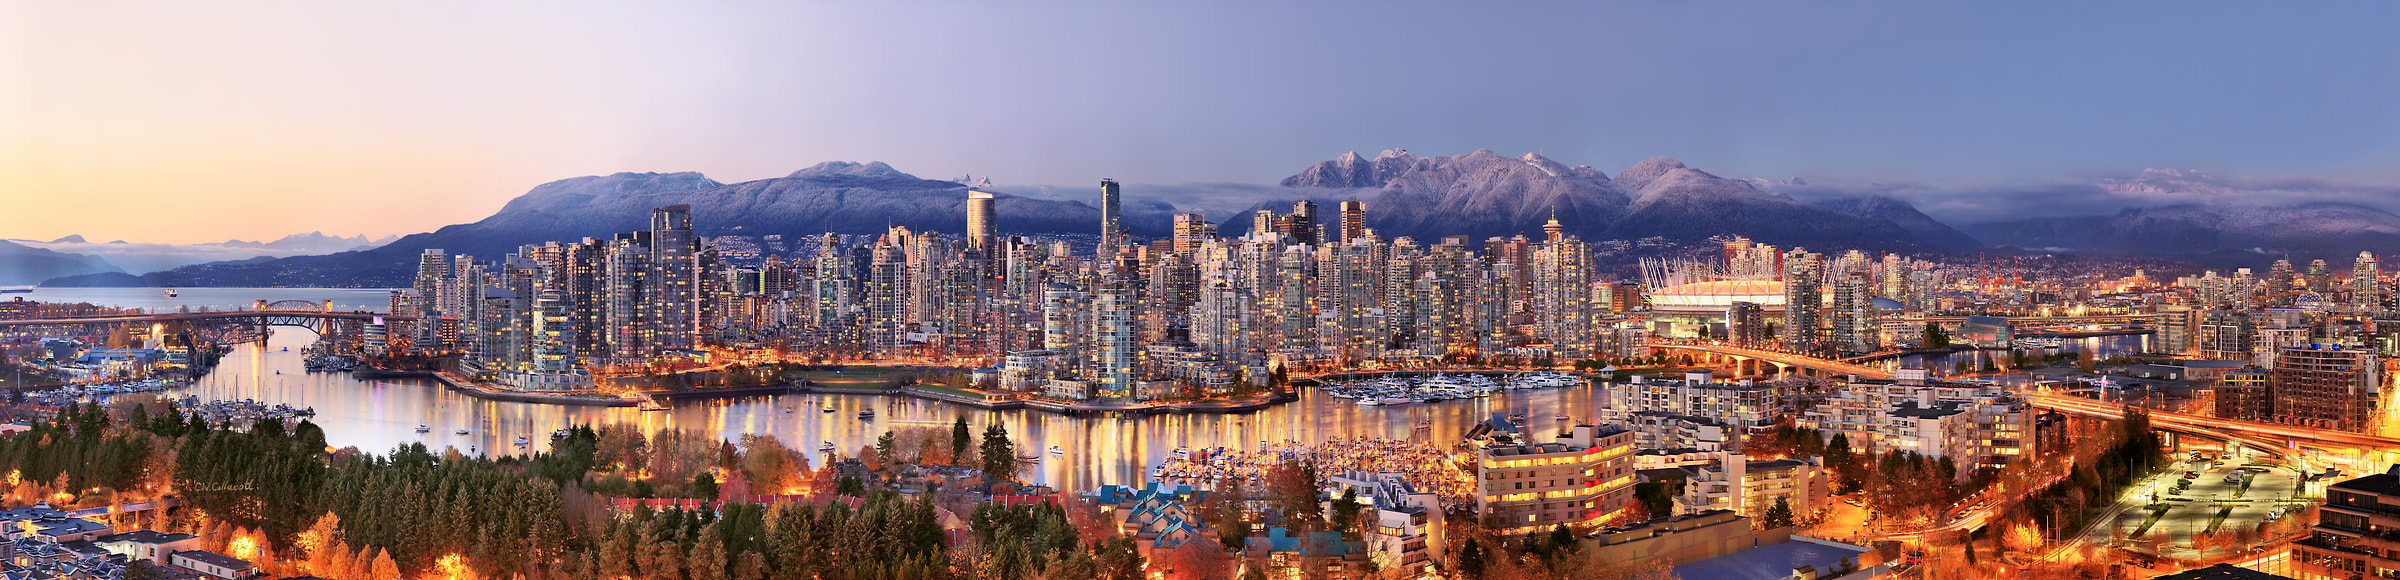 959 megapixels! A very high resolution, large-format VAST photo print of the Vancouver skyline; photograph created by Chris Collacott in Vancouver, British Columbia, Canada